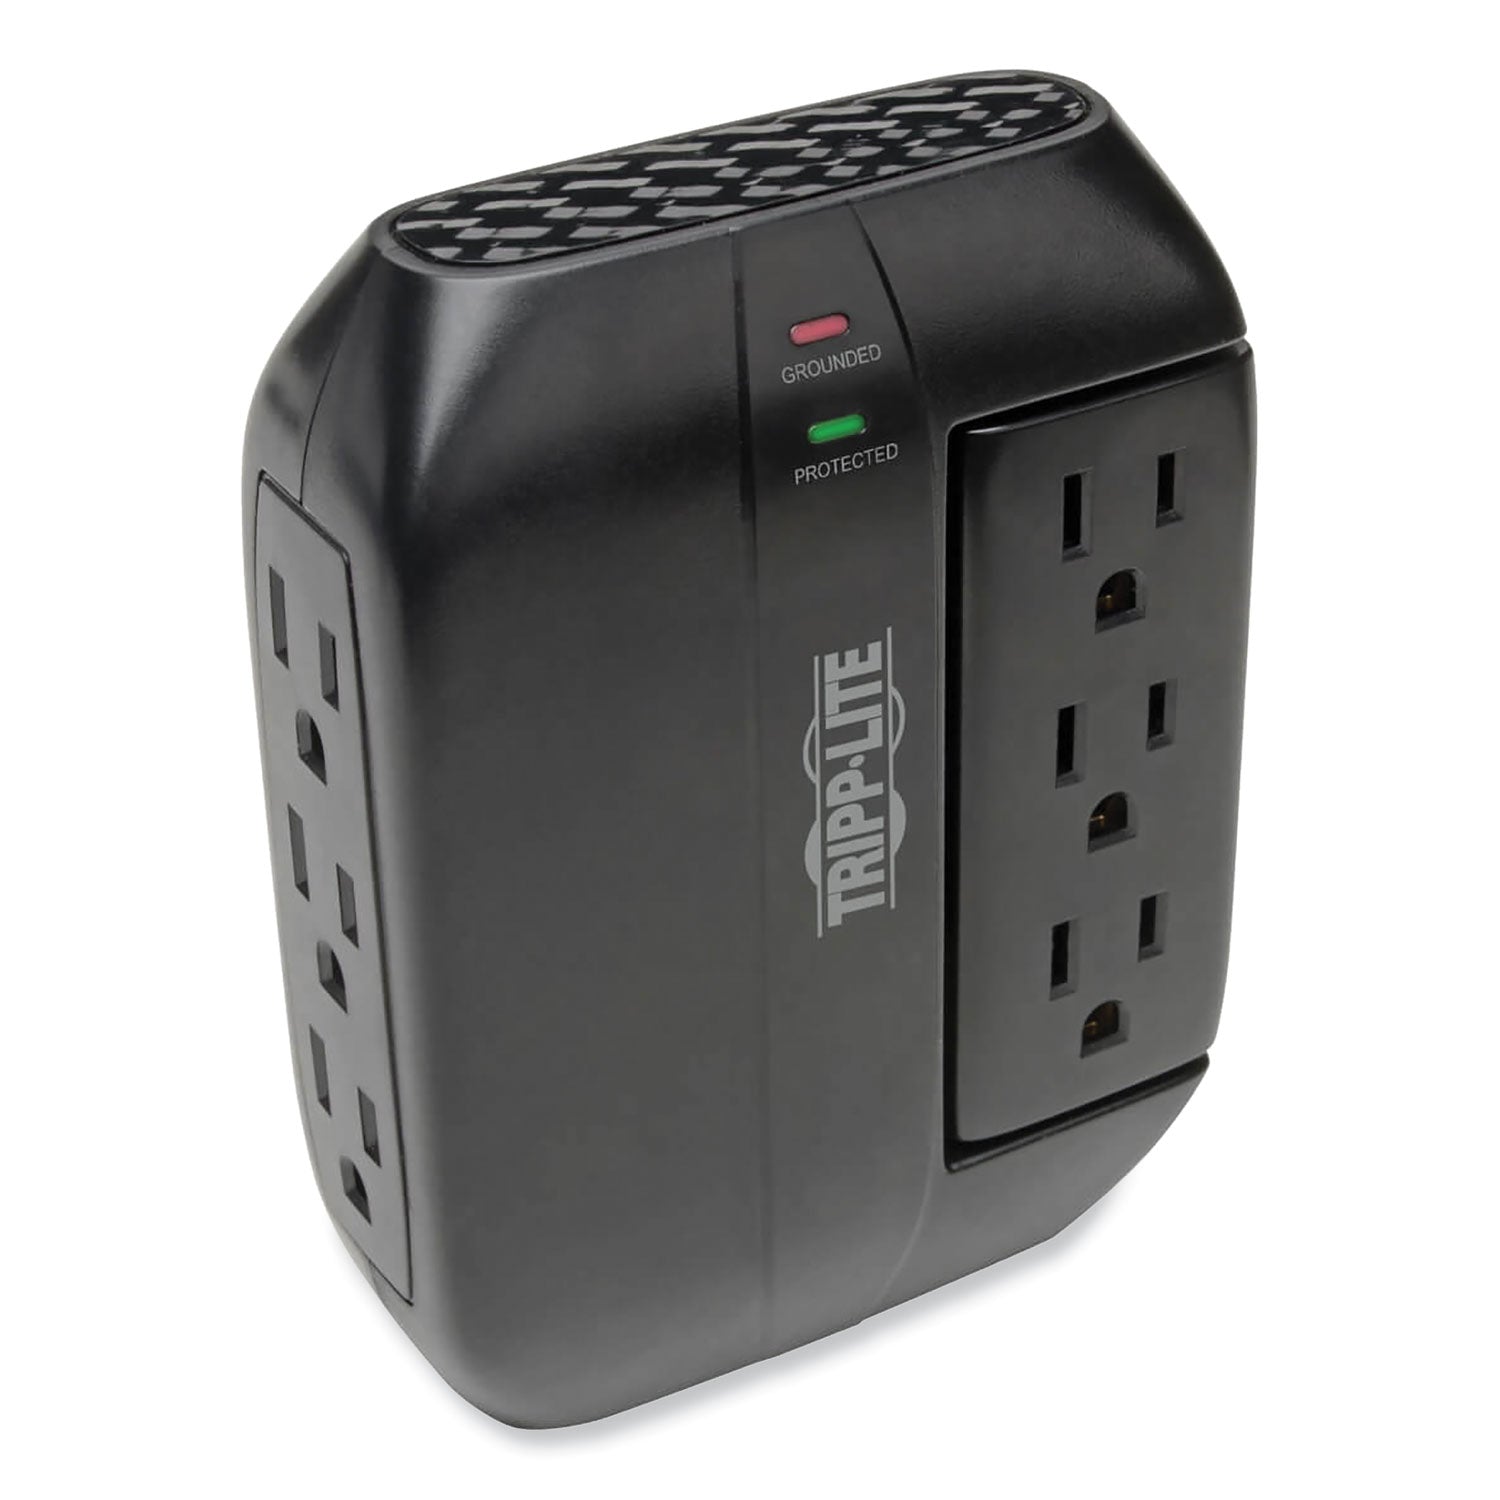 Protect It! Surge Protector, 6 AC Outlets, 1,500 J, Black - 